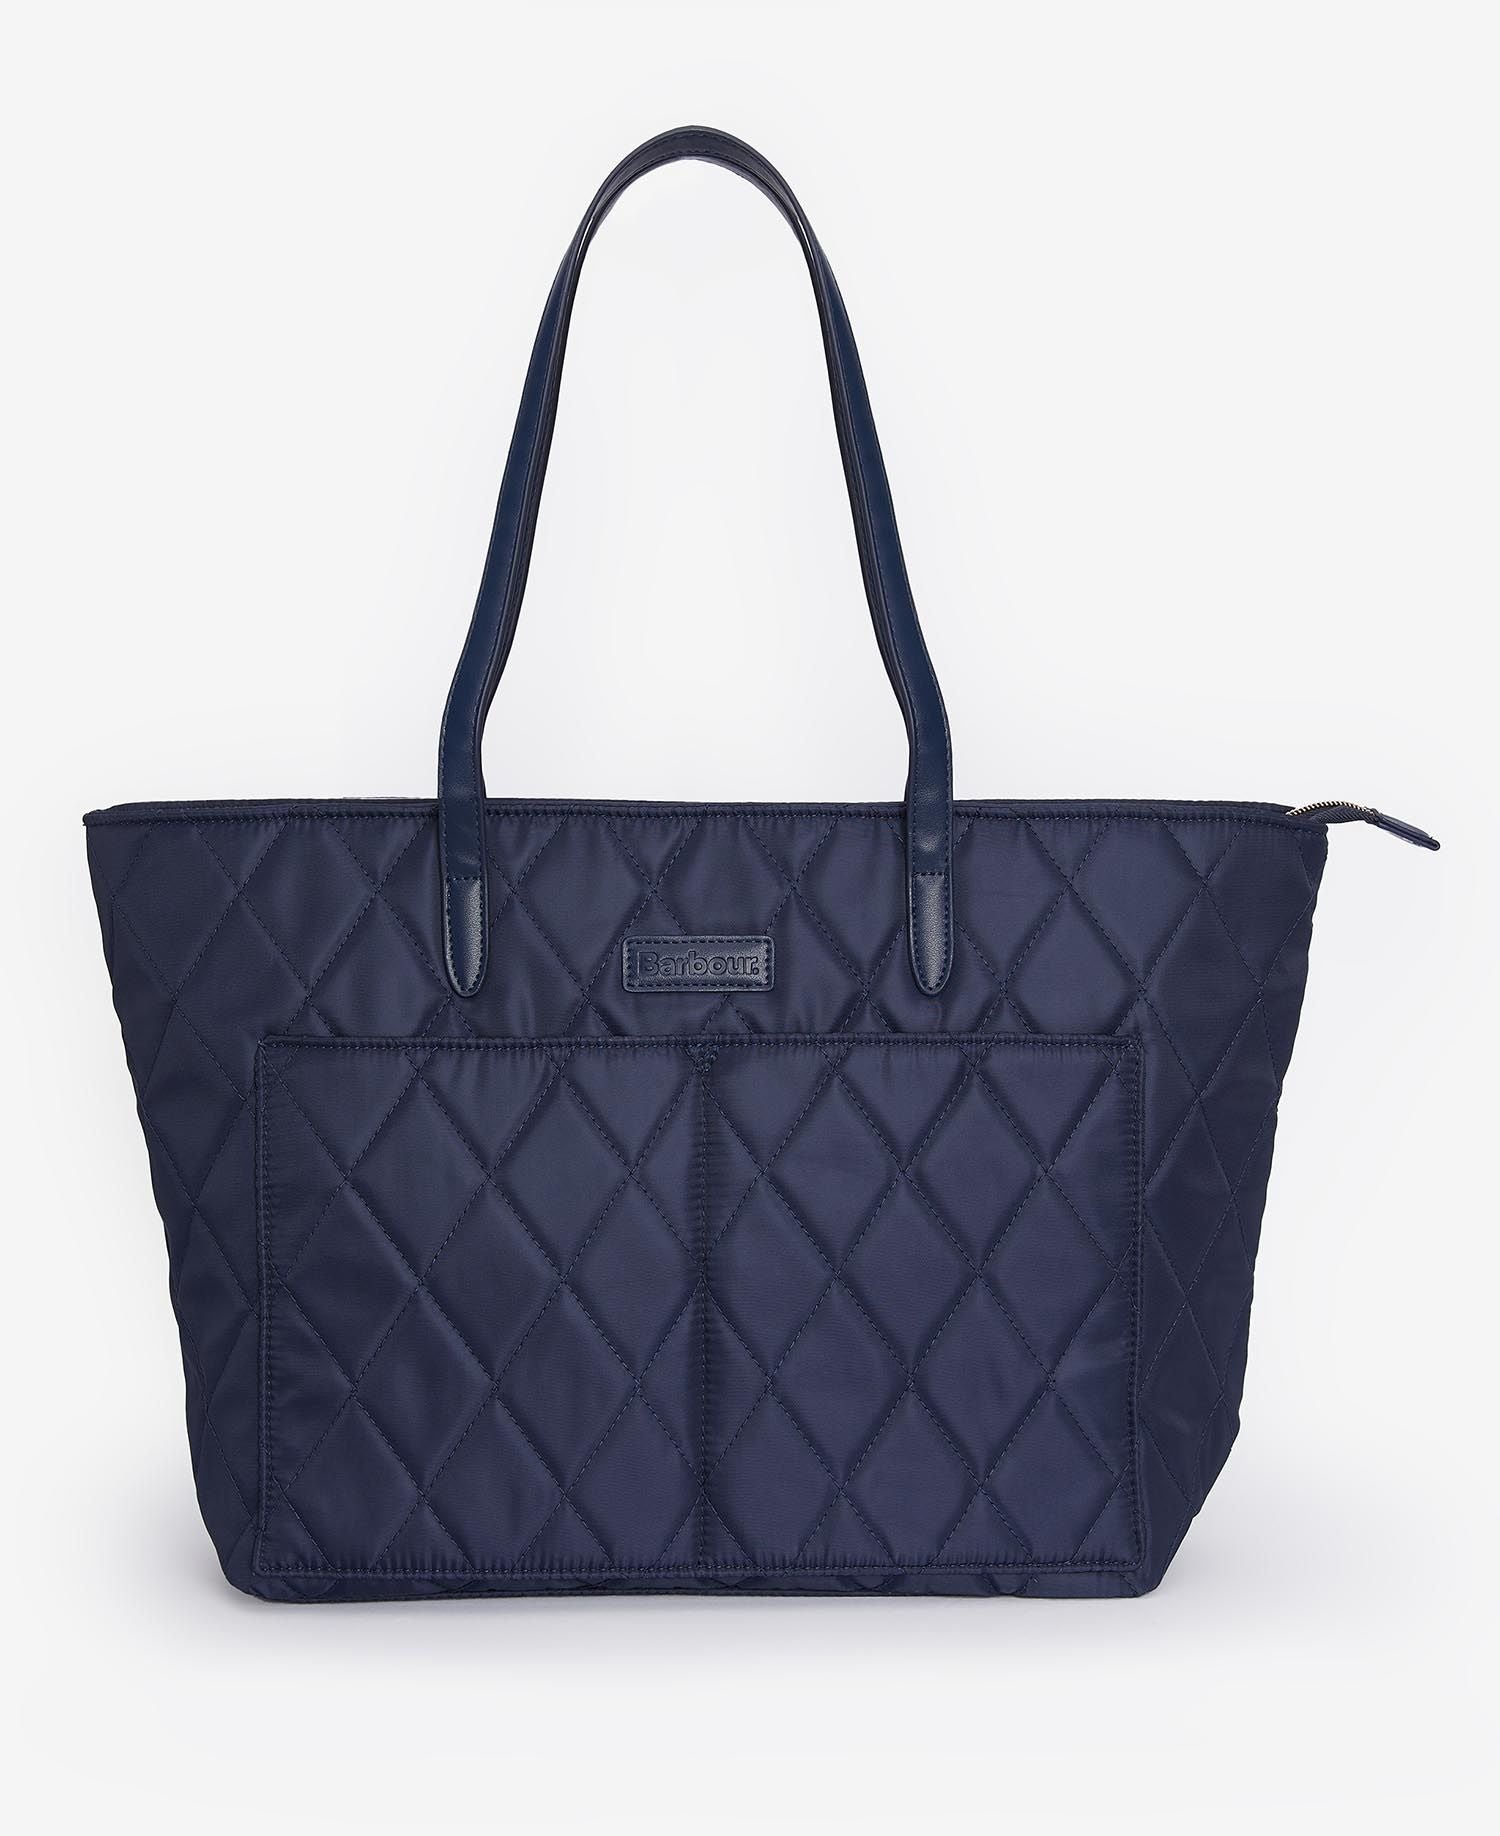 Barbour Quilted Tote Bag - Navy